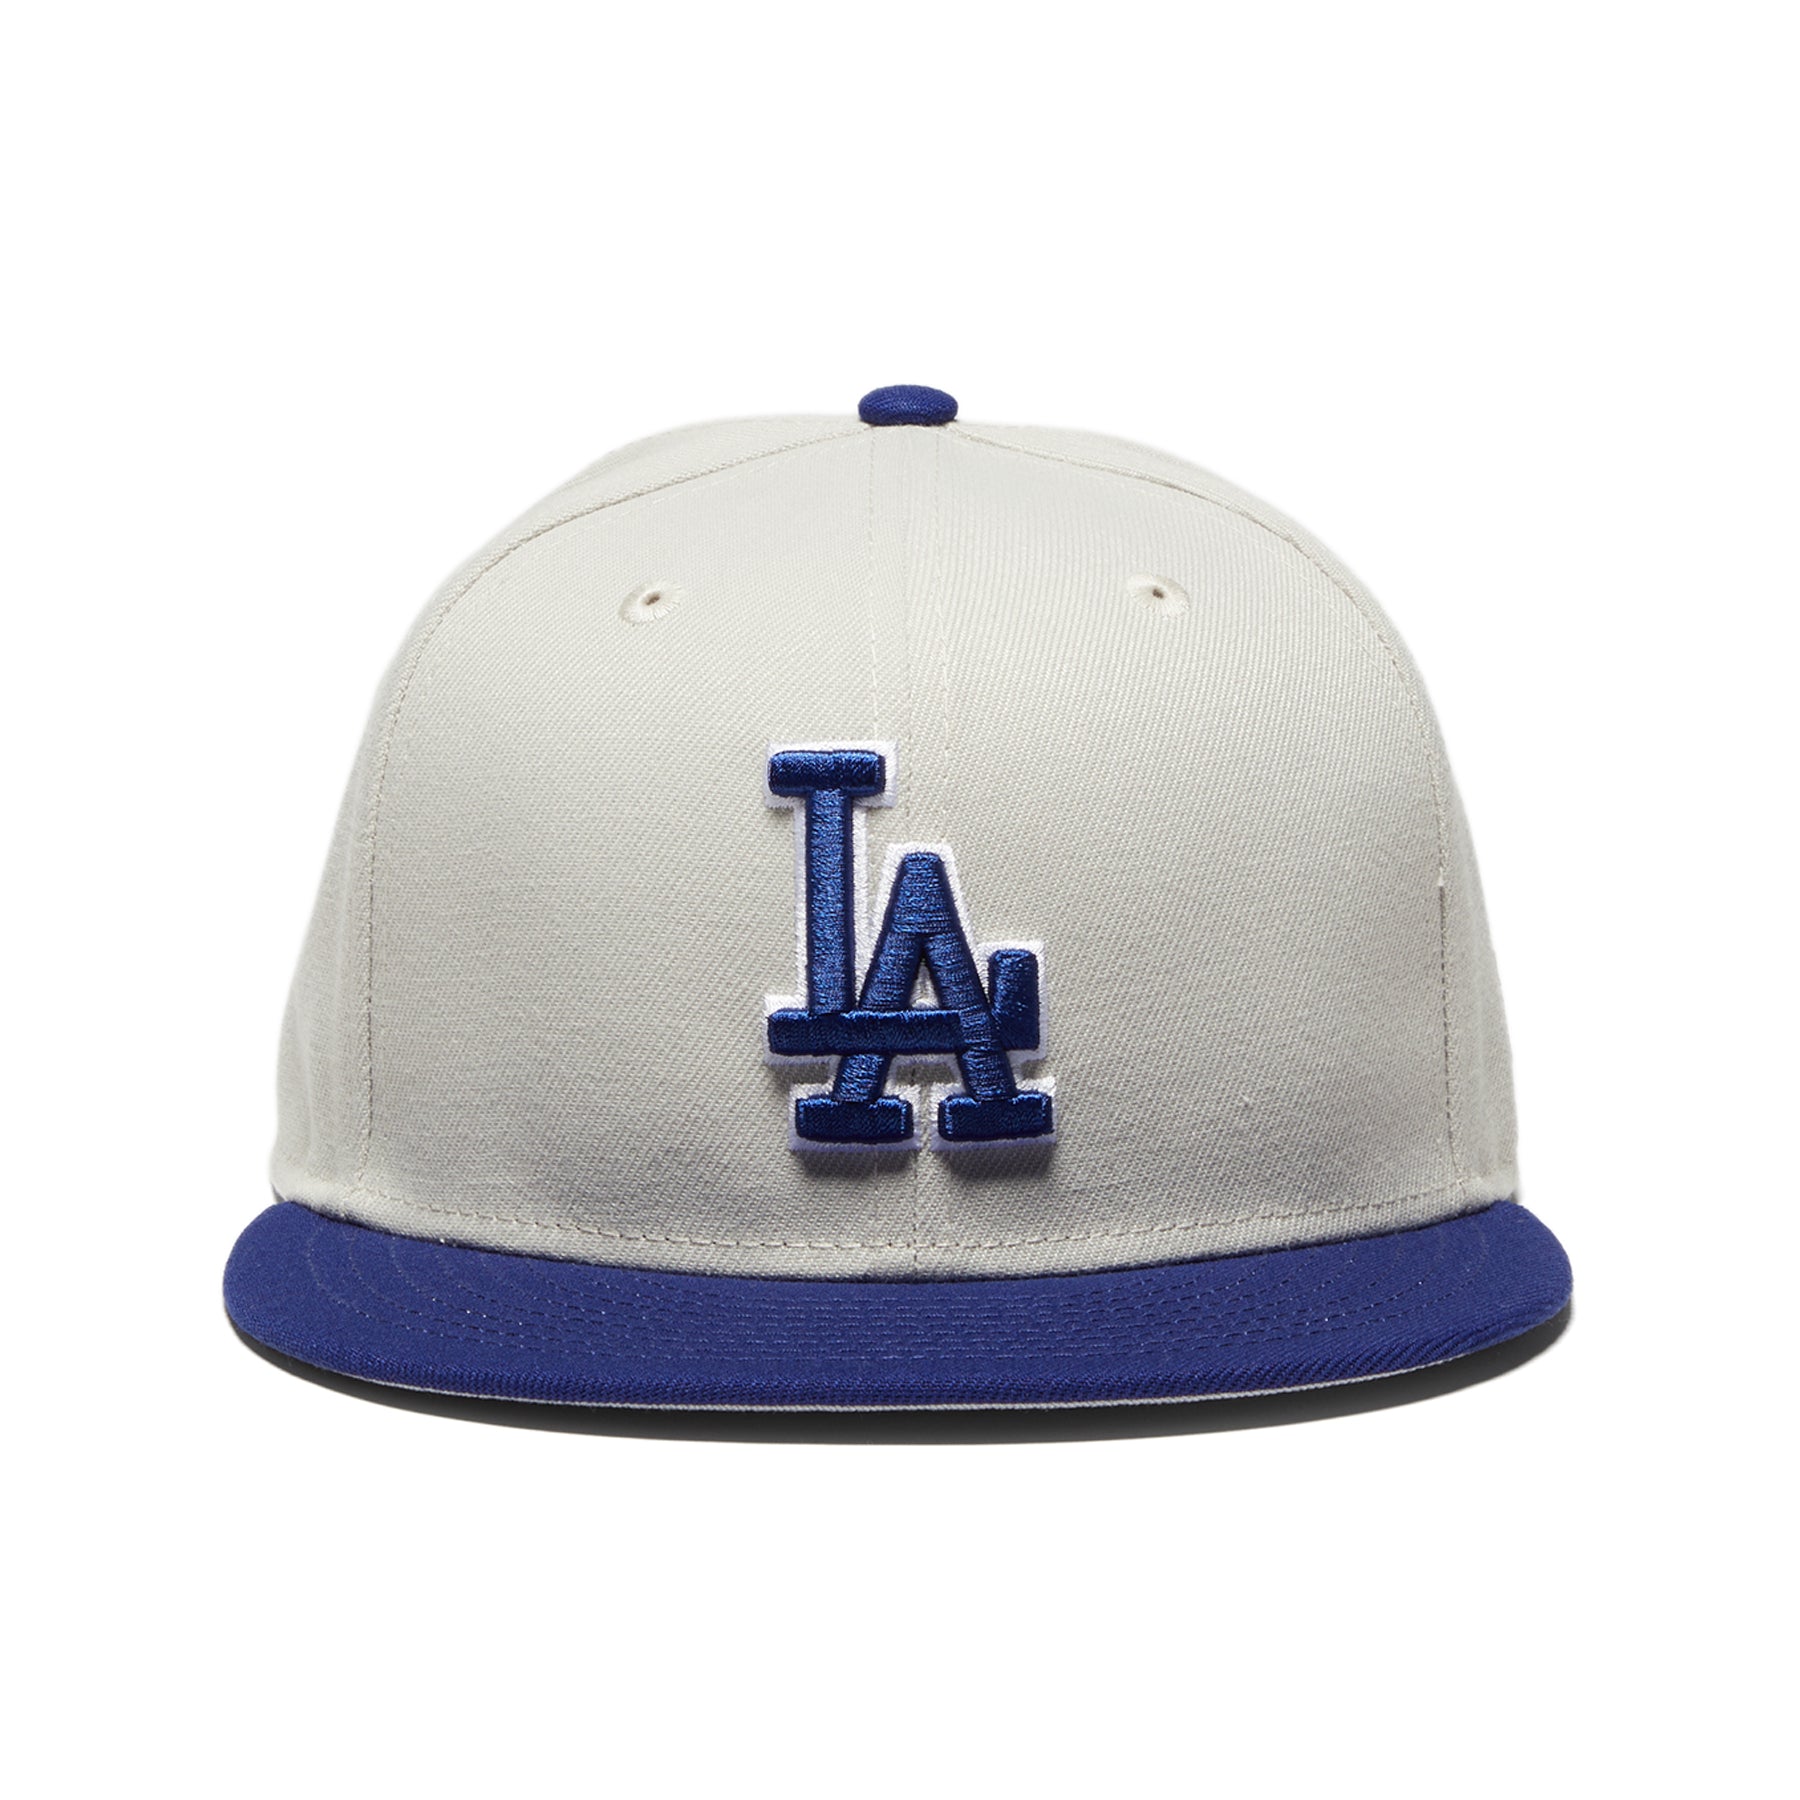 New Era Los Angeles Dodgers 59FIFTY Fitted Hat Grey/White